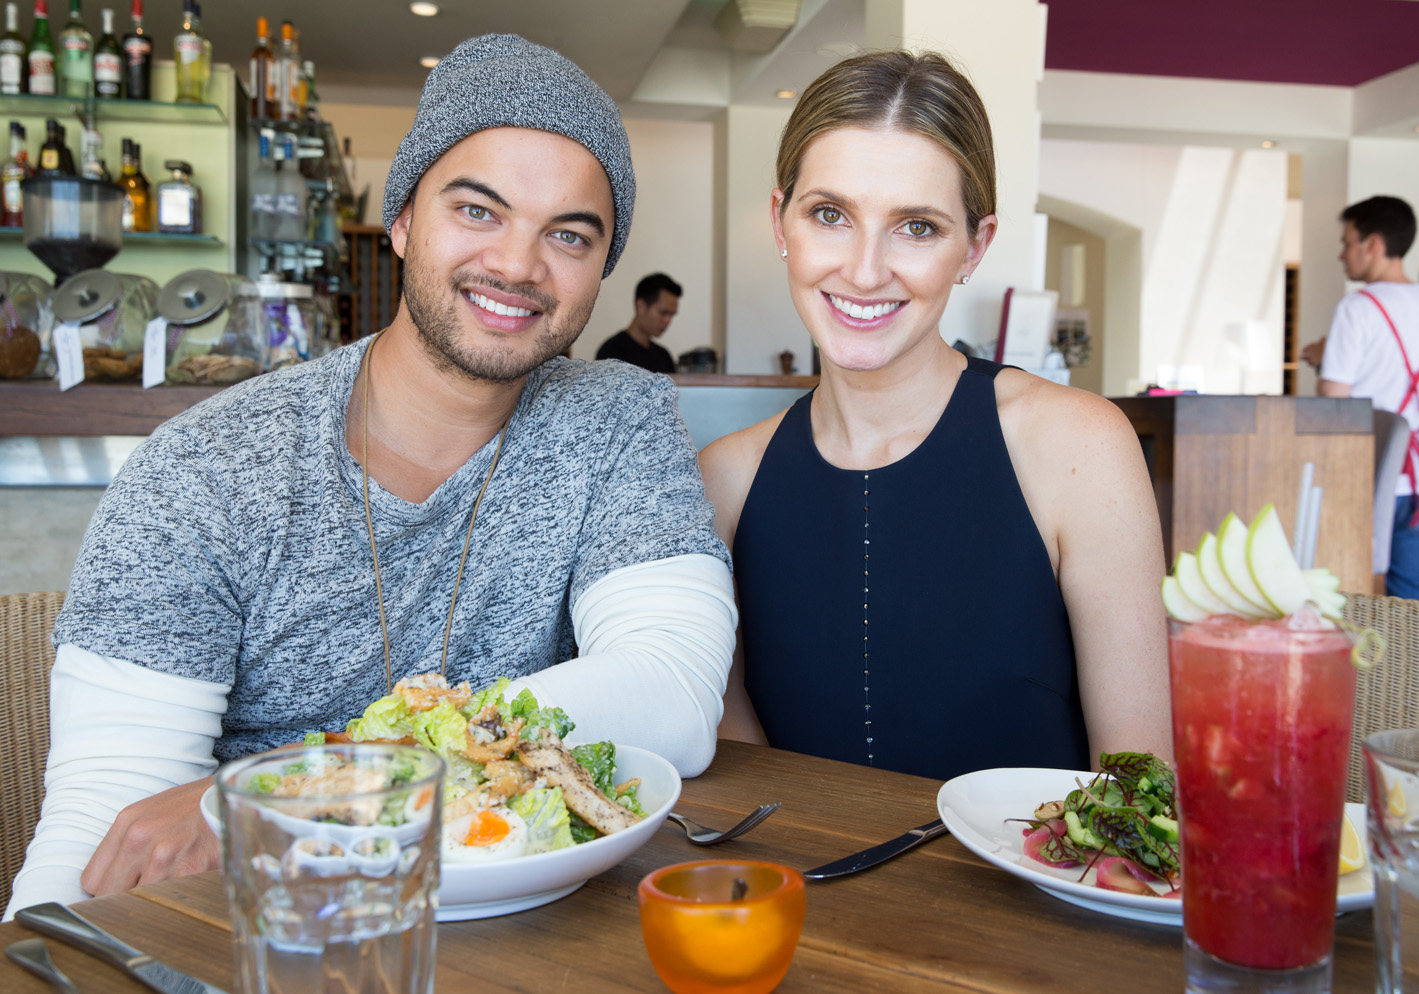 Date with Kate: Kate Waterhouse and Guy Sebastian at The Bathers Pavillion in Balmoral, Sydney. 10th November 2016 Photo: Janie Barrett